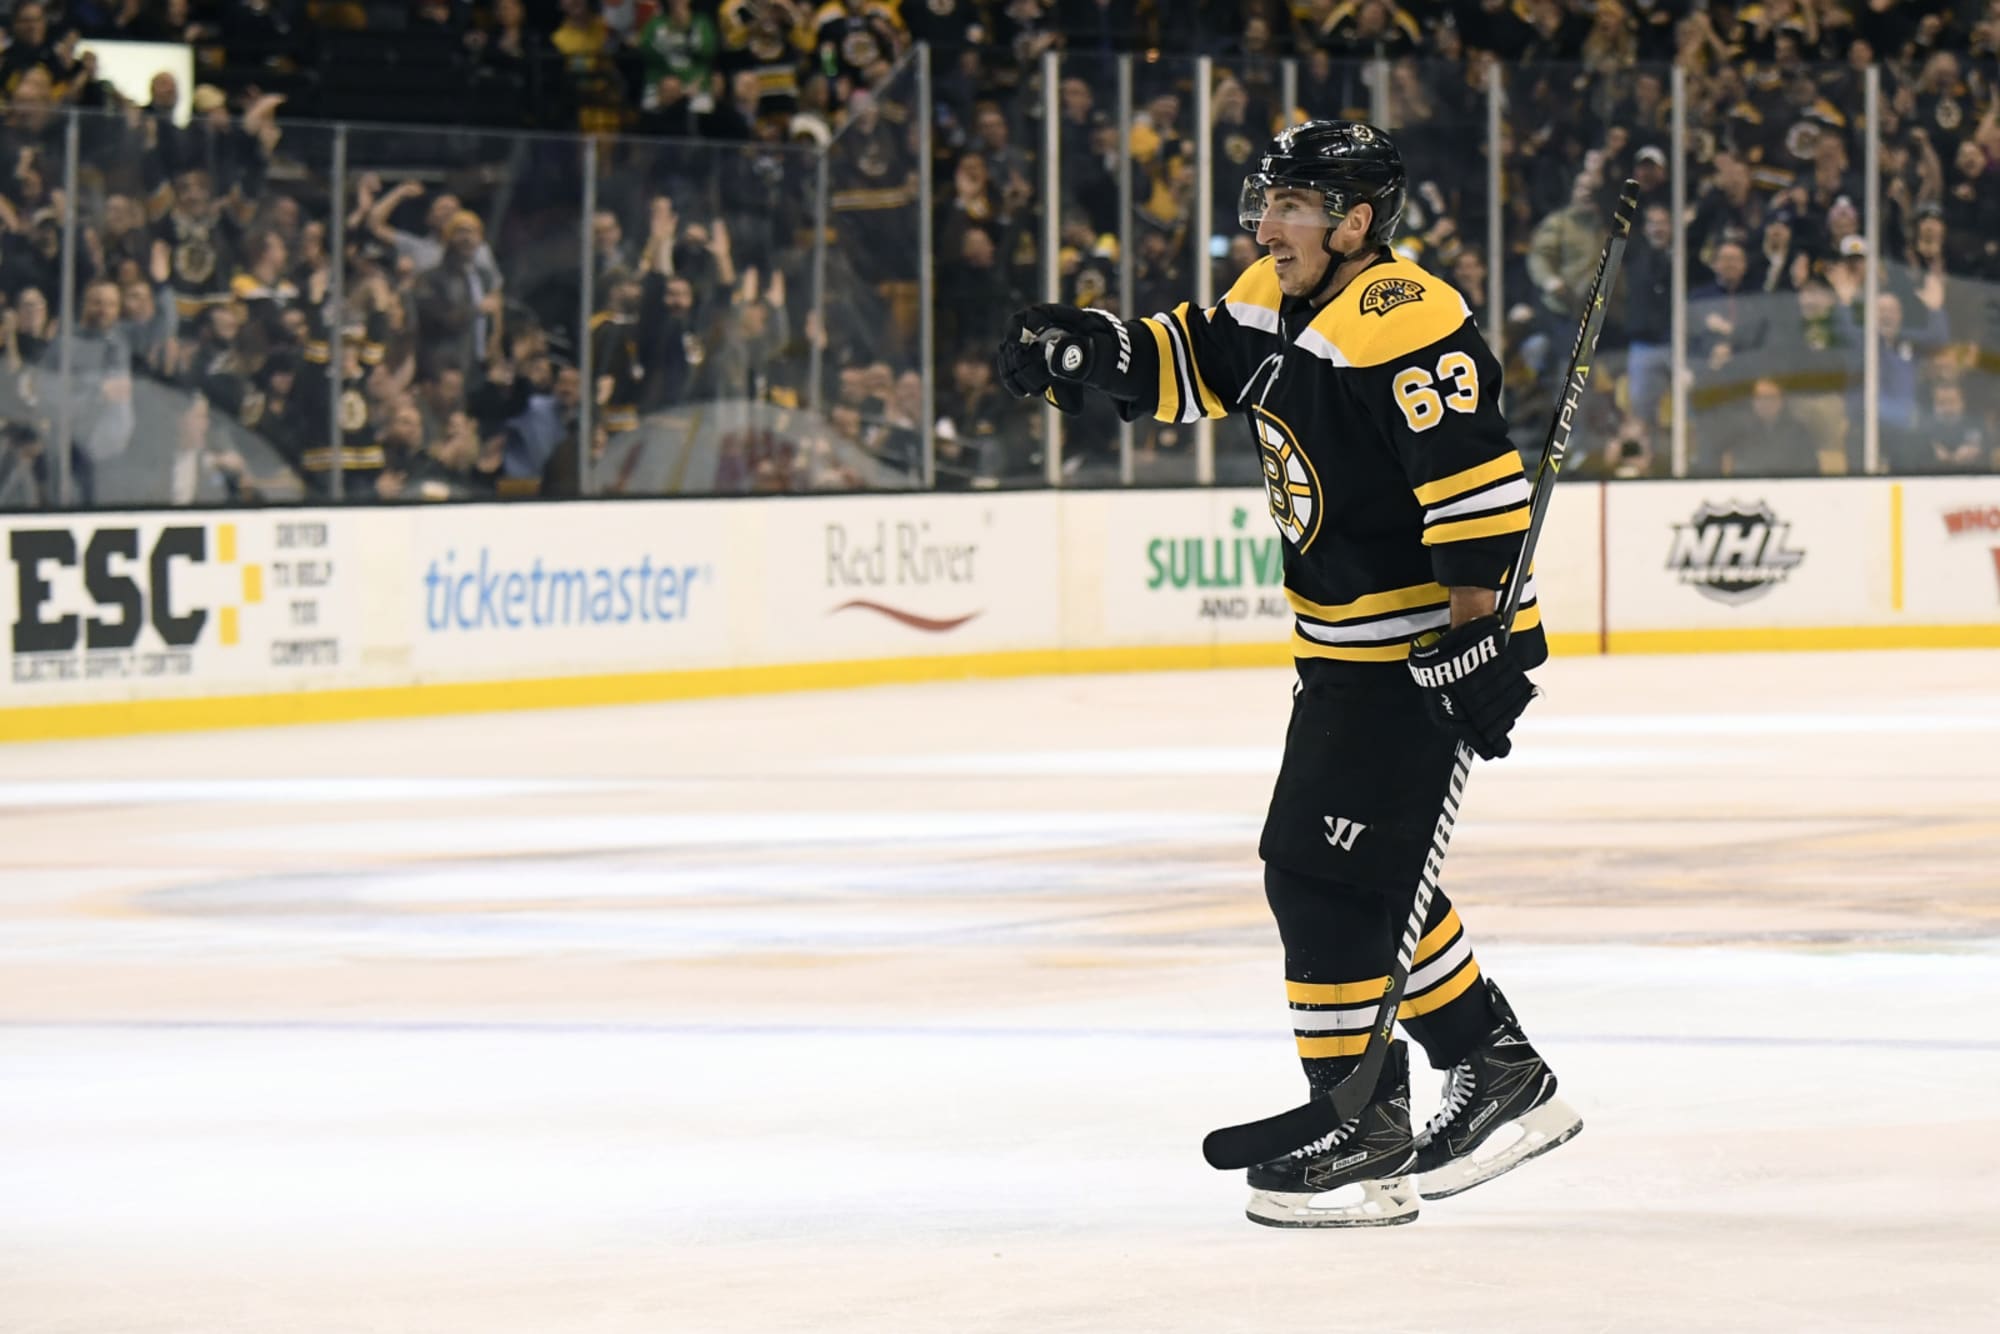 Built for Boston by Brad Marchand